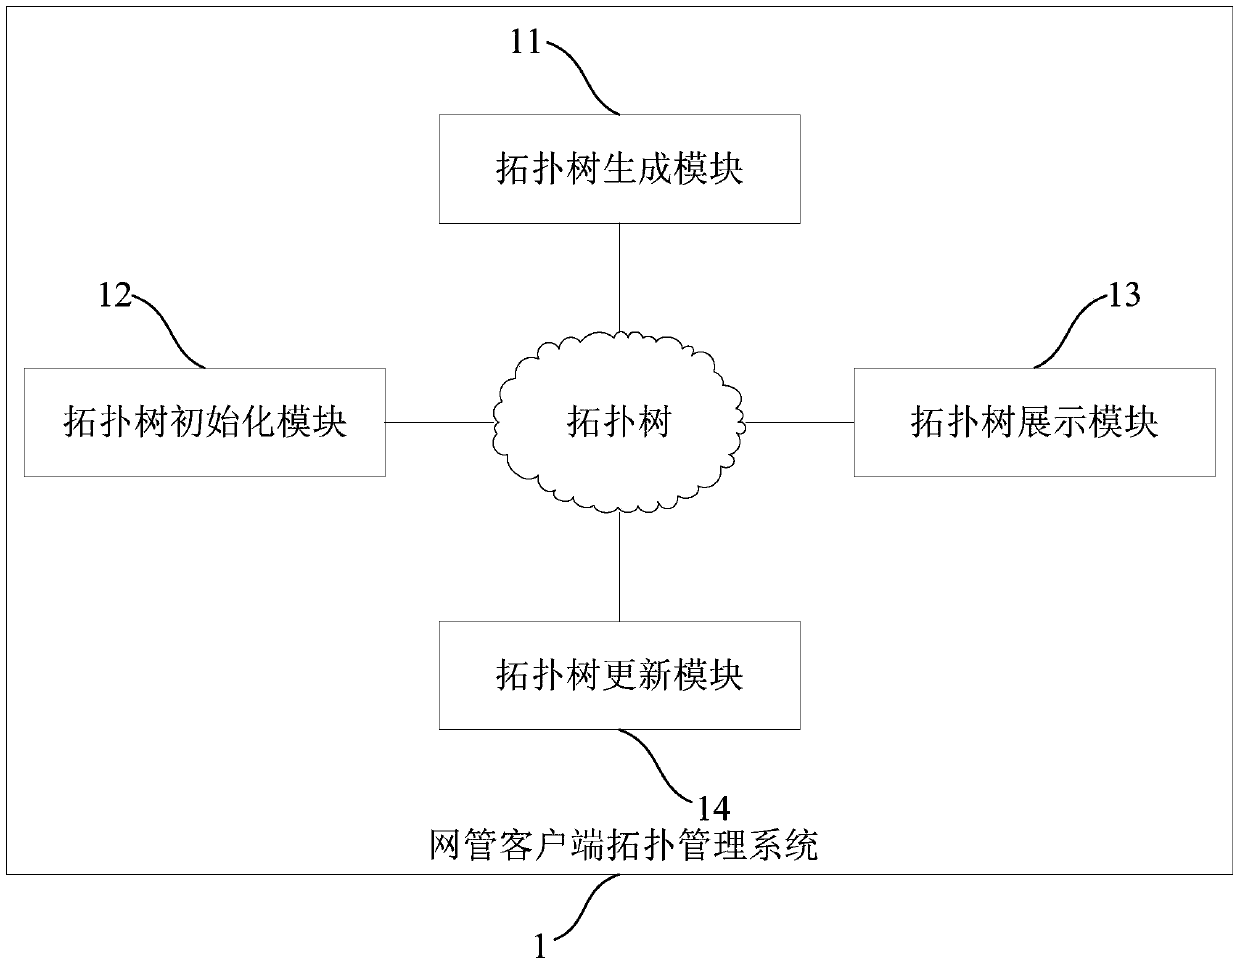 A network management client topology management system and method